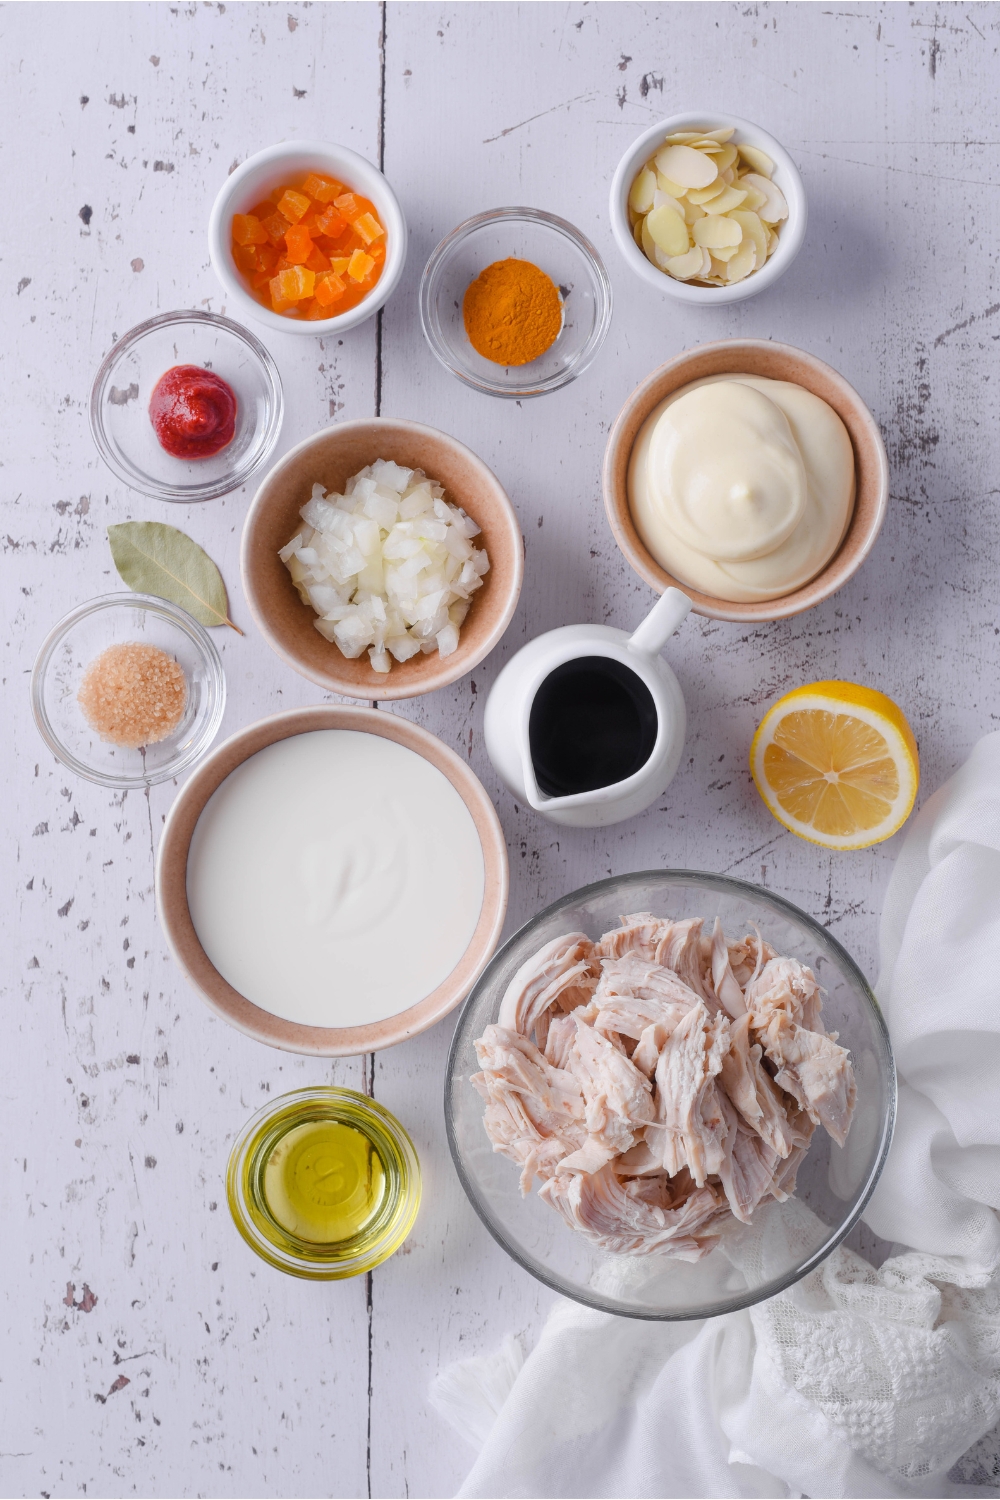 An assortment of ingredients including bowls of mayonnaise, creme fraiche, cooked chicken, oil, spices, and diced apricots.